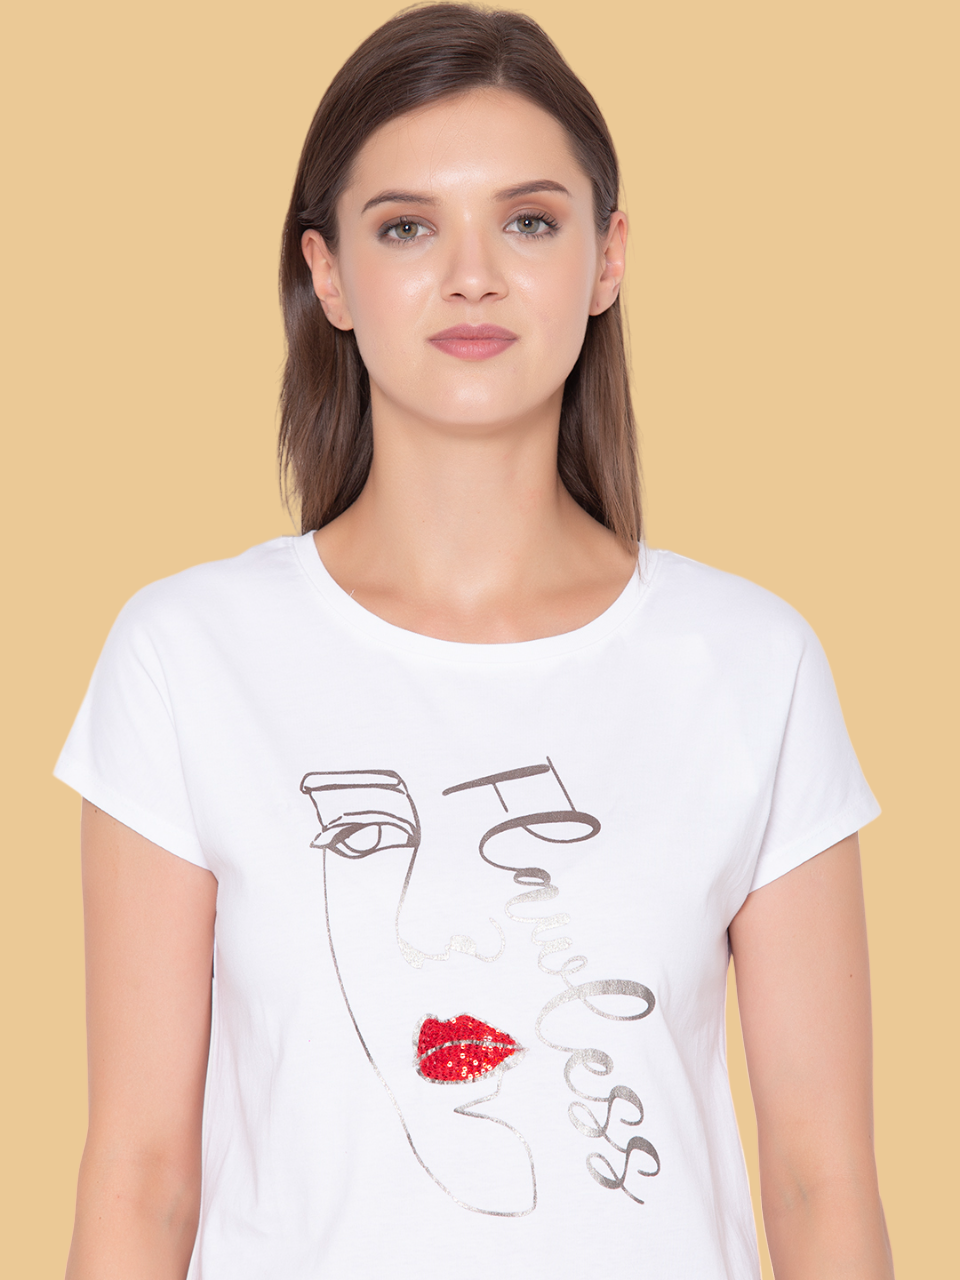 Flawless Women's 100% Cotton T-Shirt in Classic White Being Flawless